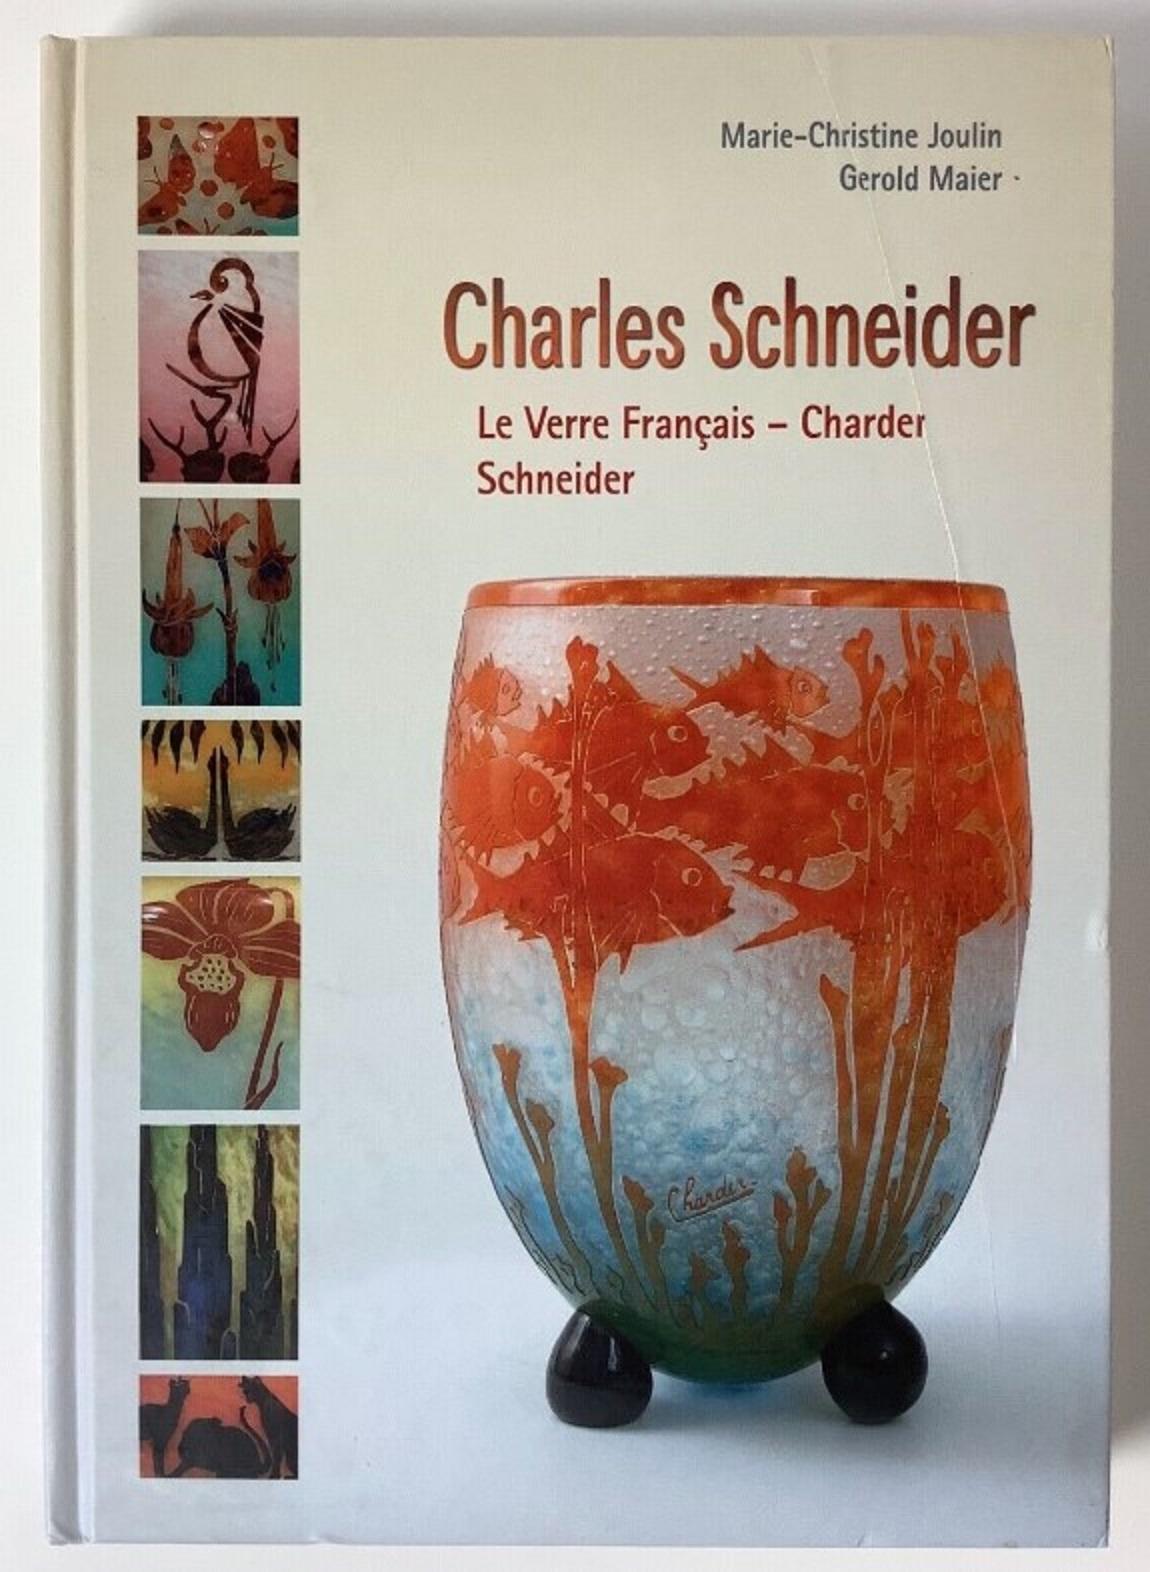 Vase With iron foot and applications
Sign: Schneider 
Schneider
Charles Schneider (1881-1953) studied art in two of most prestigious French school of the Arts. First in the School of Fine Arts in Nancy, then in the elite Ecole des Beaux Arts in